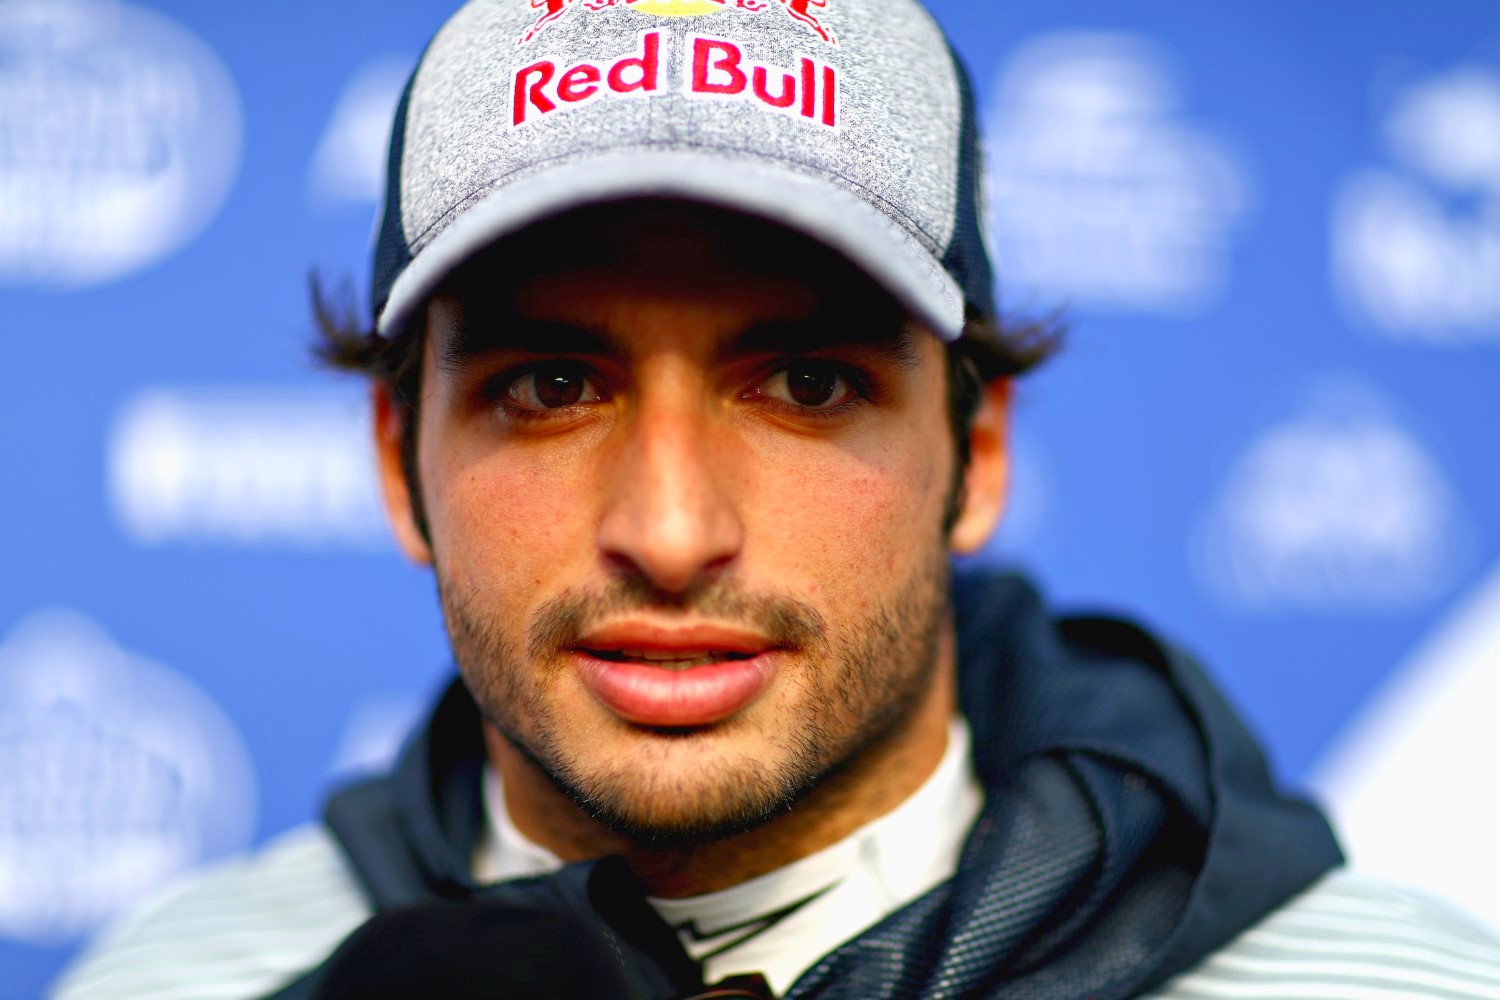 Sainz Jr under contract with Red Bull